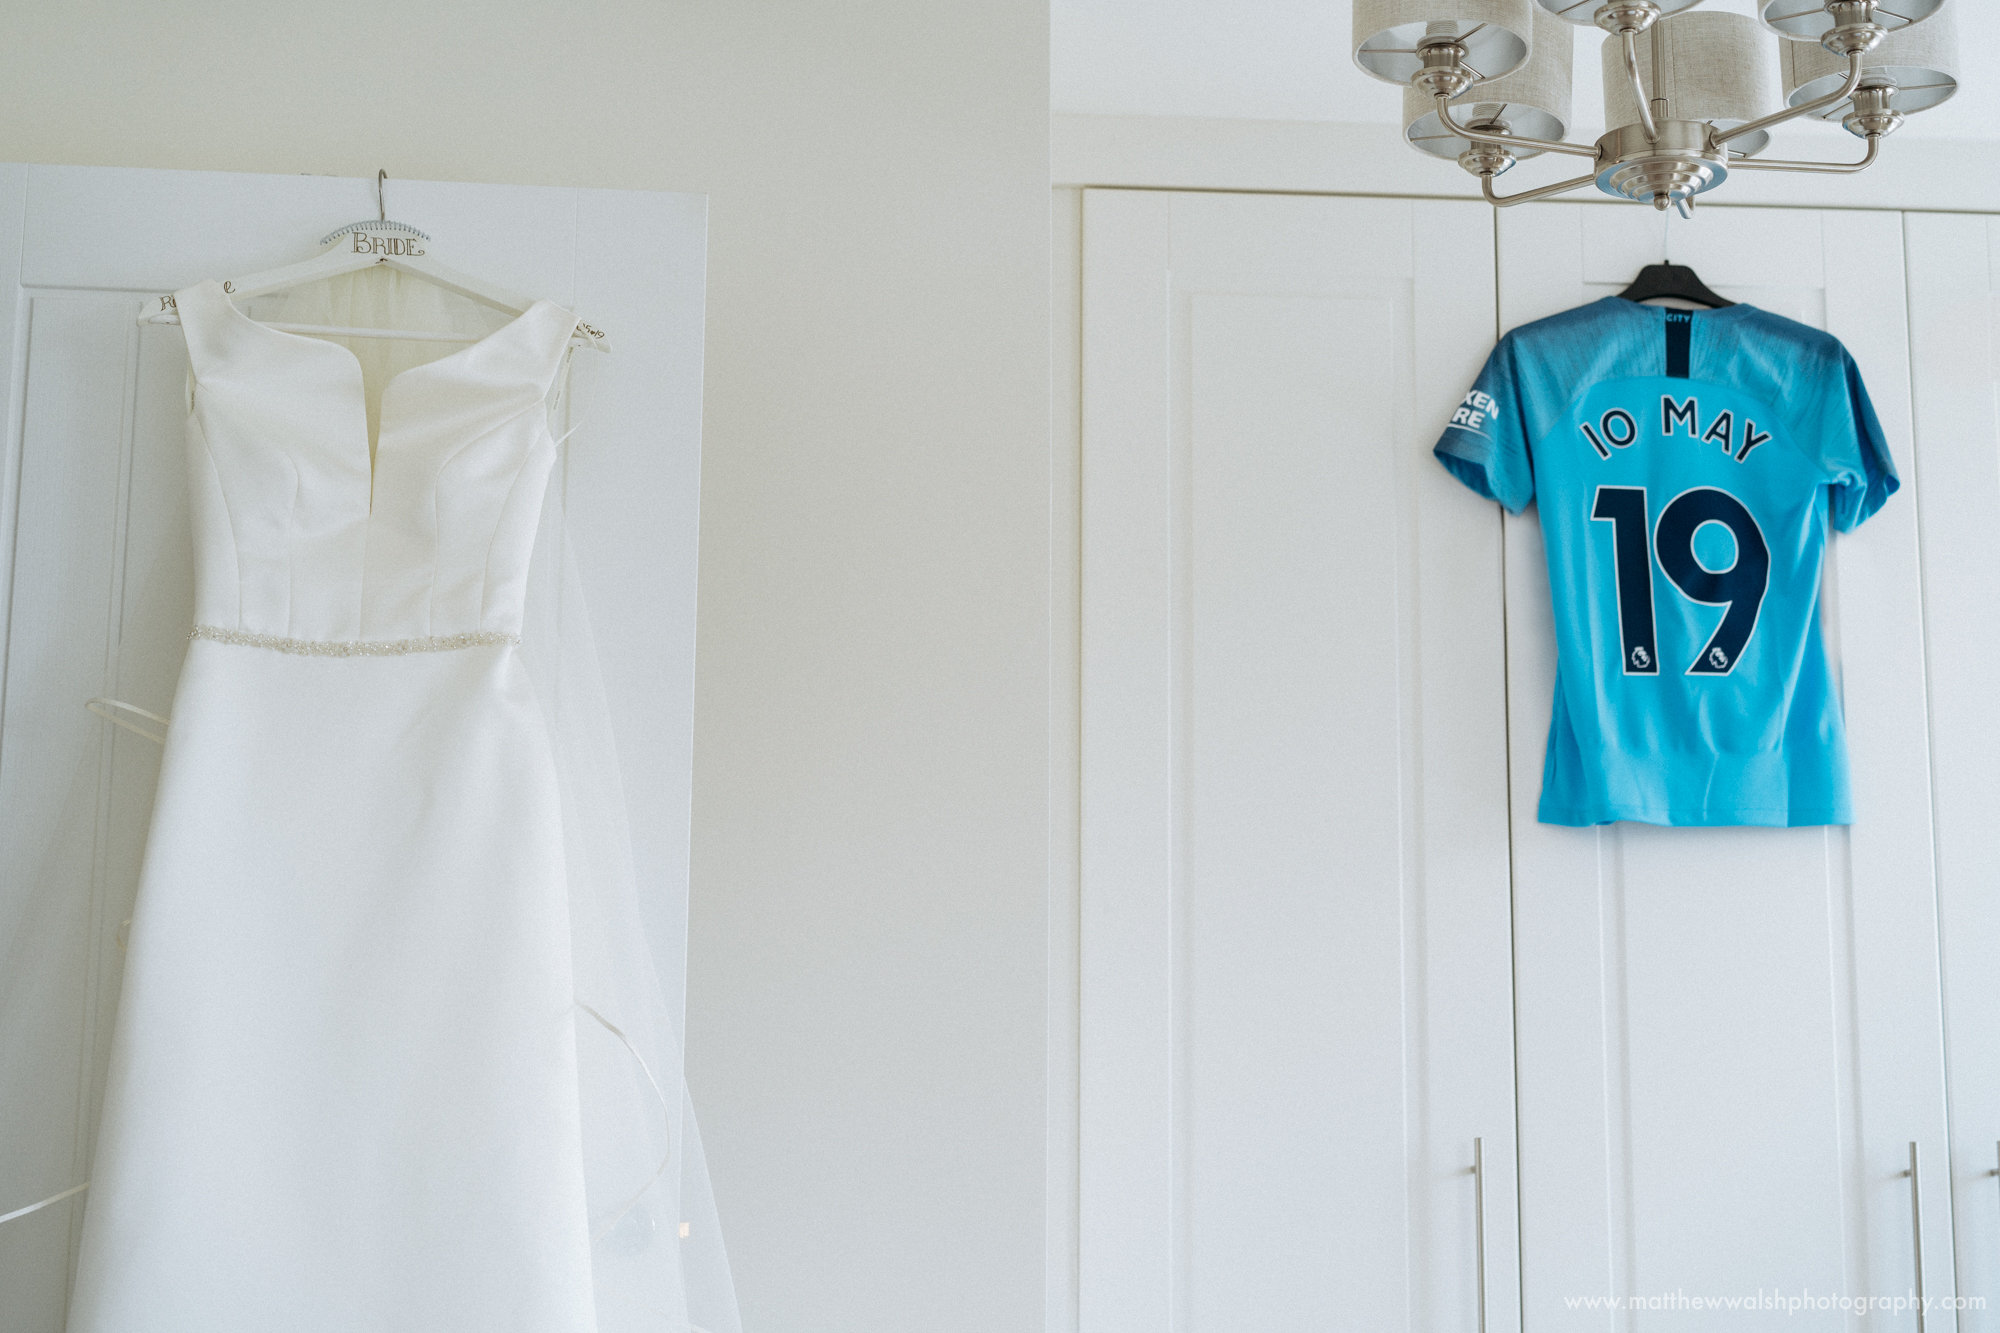 The wedding dress hanging bu a Manchester City football shirt with the wedding date on, the bride being a big football fan